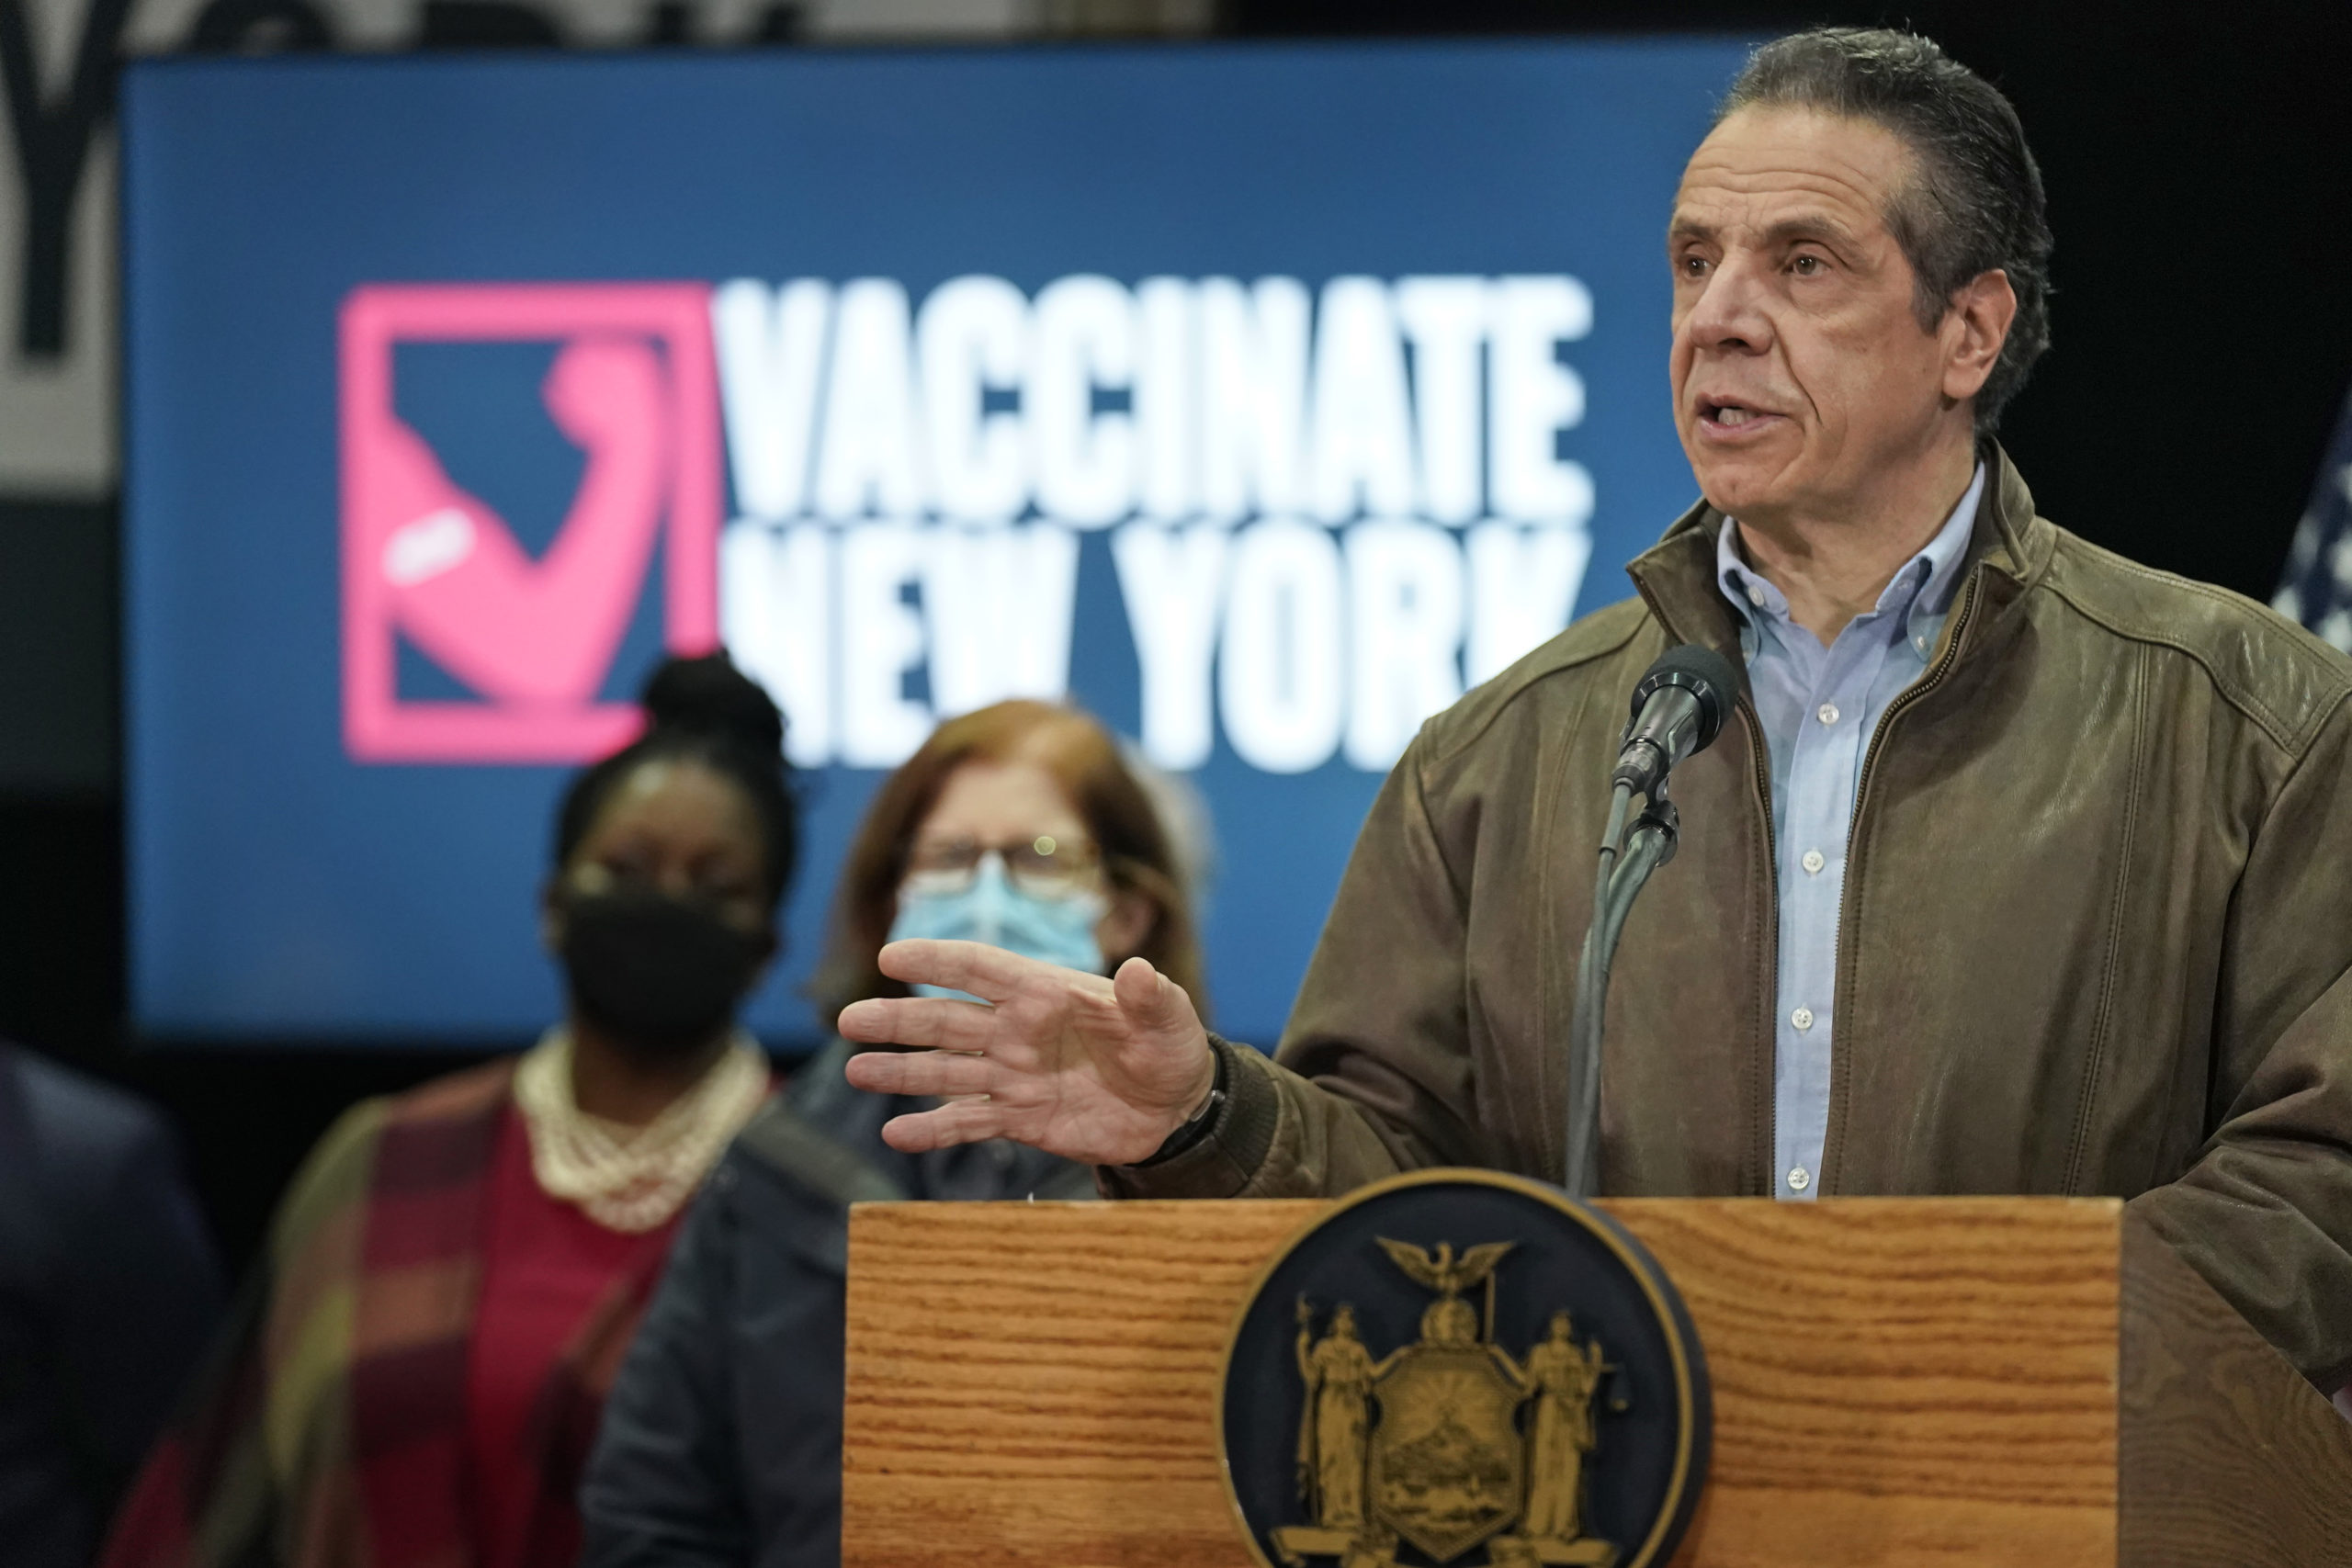 New York Governor Andrew Cuomo speaks during a press conference before the opening of a mass Covid-19 vaccination site in the Queens borough of New York, on February 24, 2021. - The site run by the Federal Emergency Management Agency (FEMA), along with another in Brooklyn, gives priority to local residents in an effort to equitably distribute the vaccine. (Photo by SETH WENIG/POOL/AFP via Getty Images)